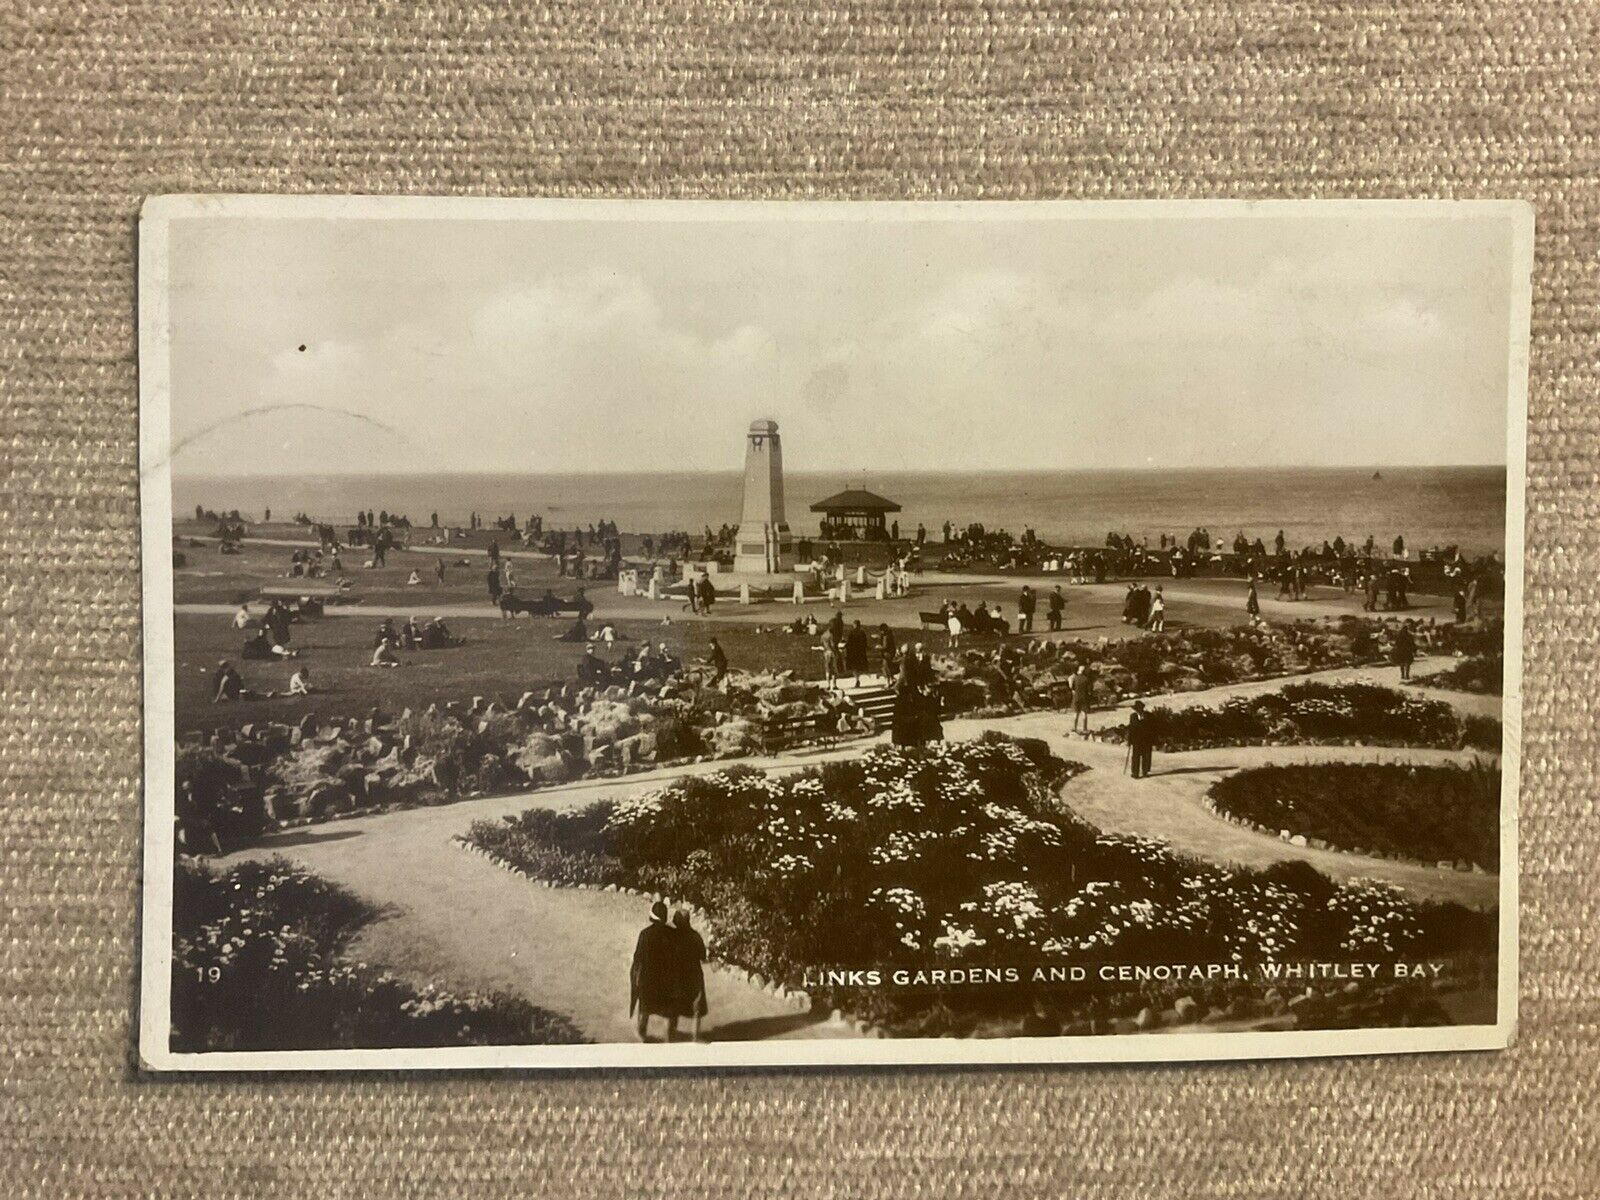 House Clearance - Pre-War Service - Links Gardens and Cenotaph, Whitley Bay, Tyne and Wear